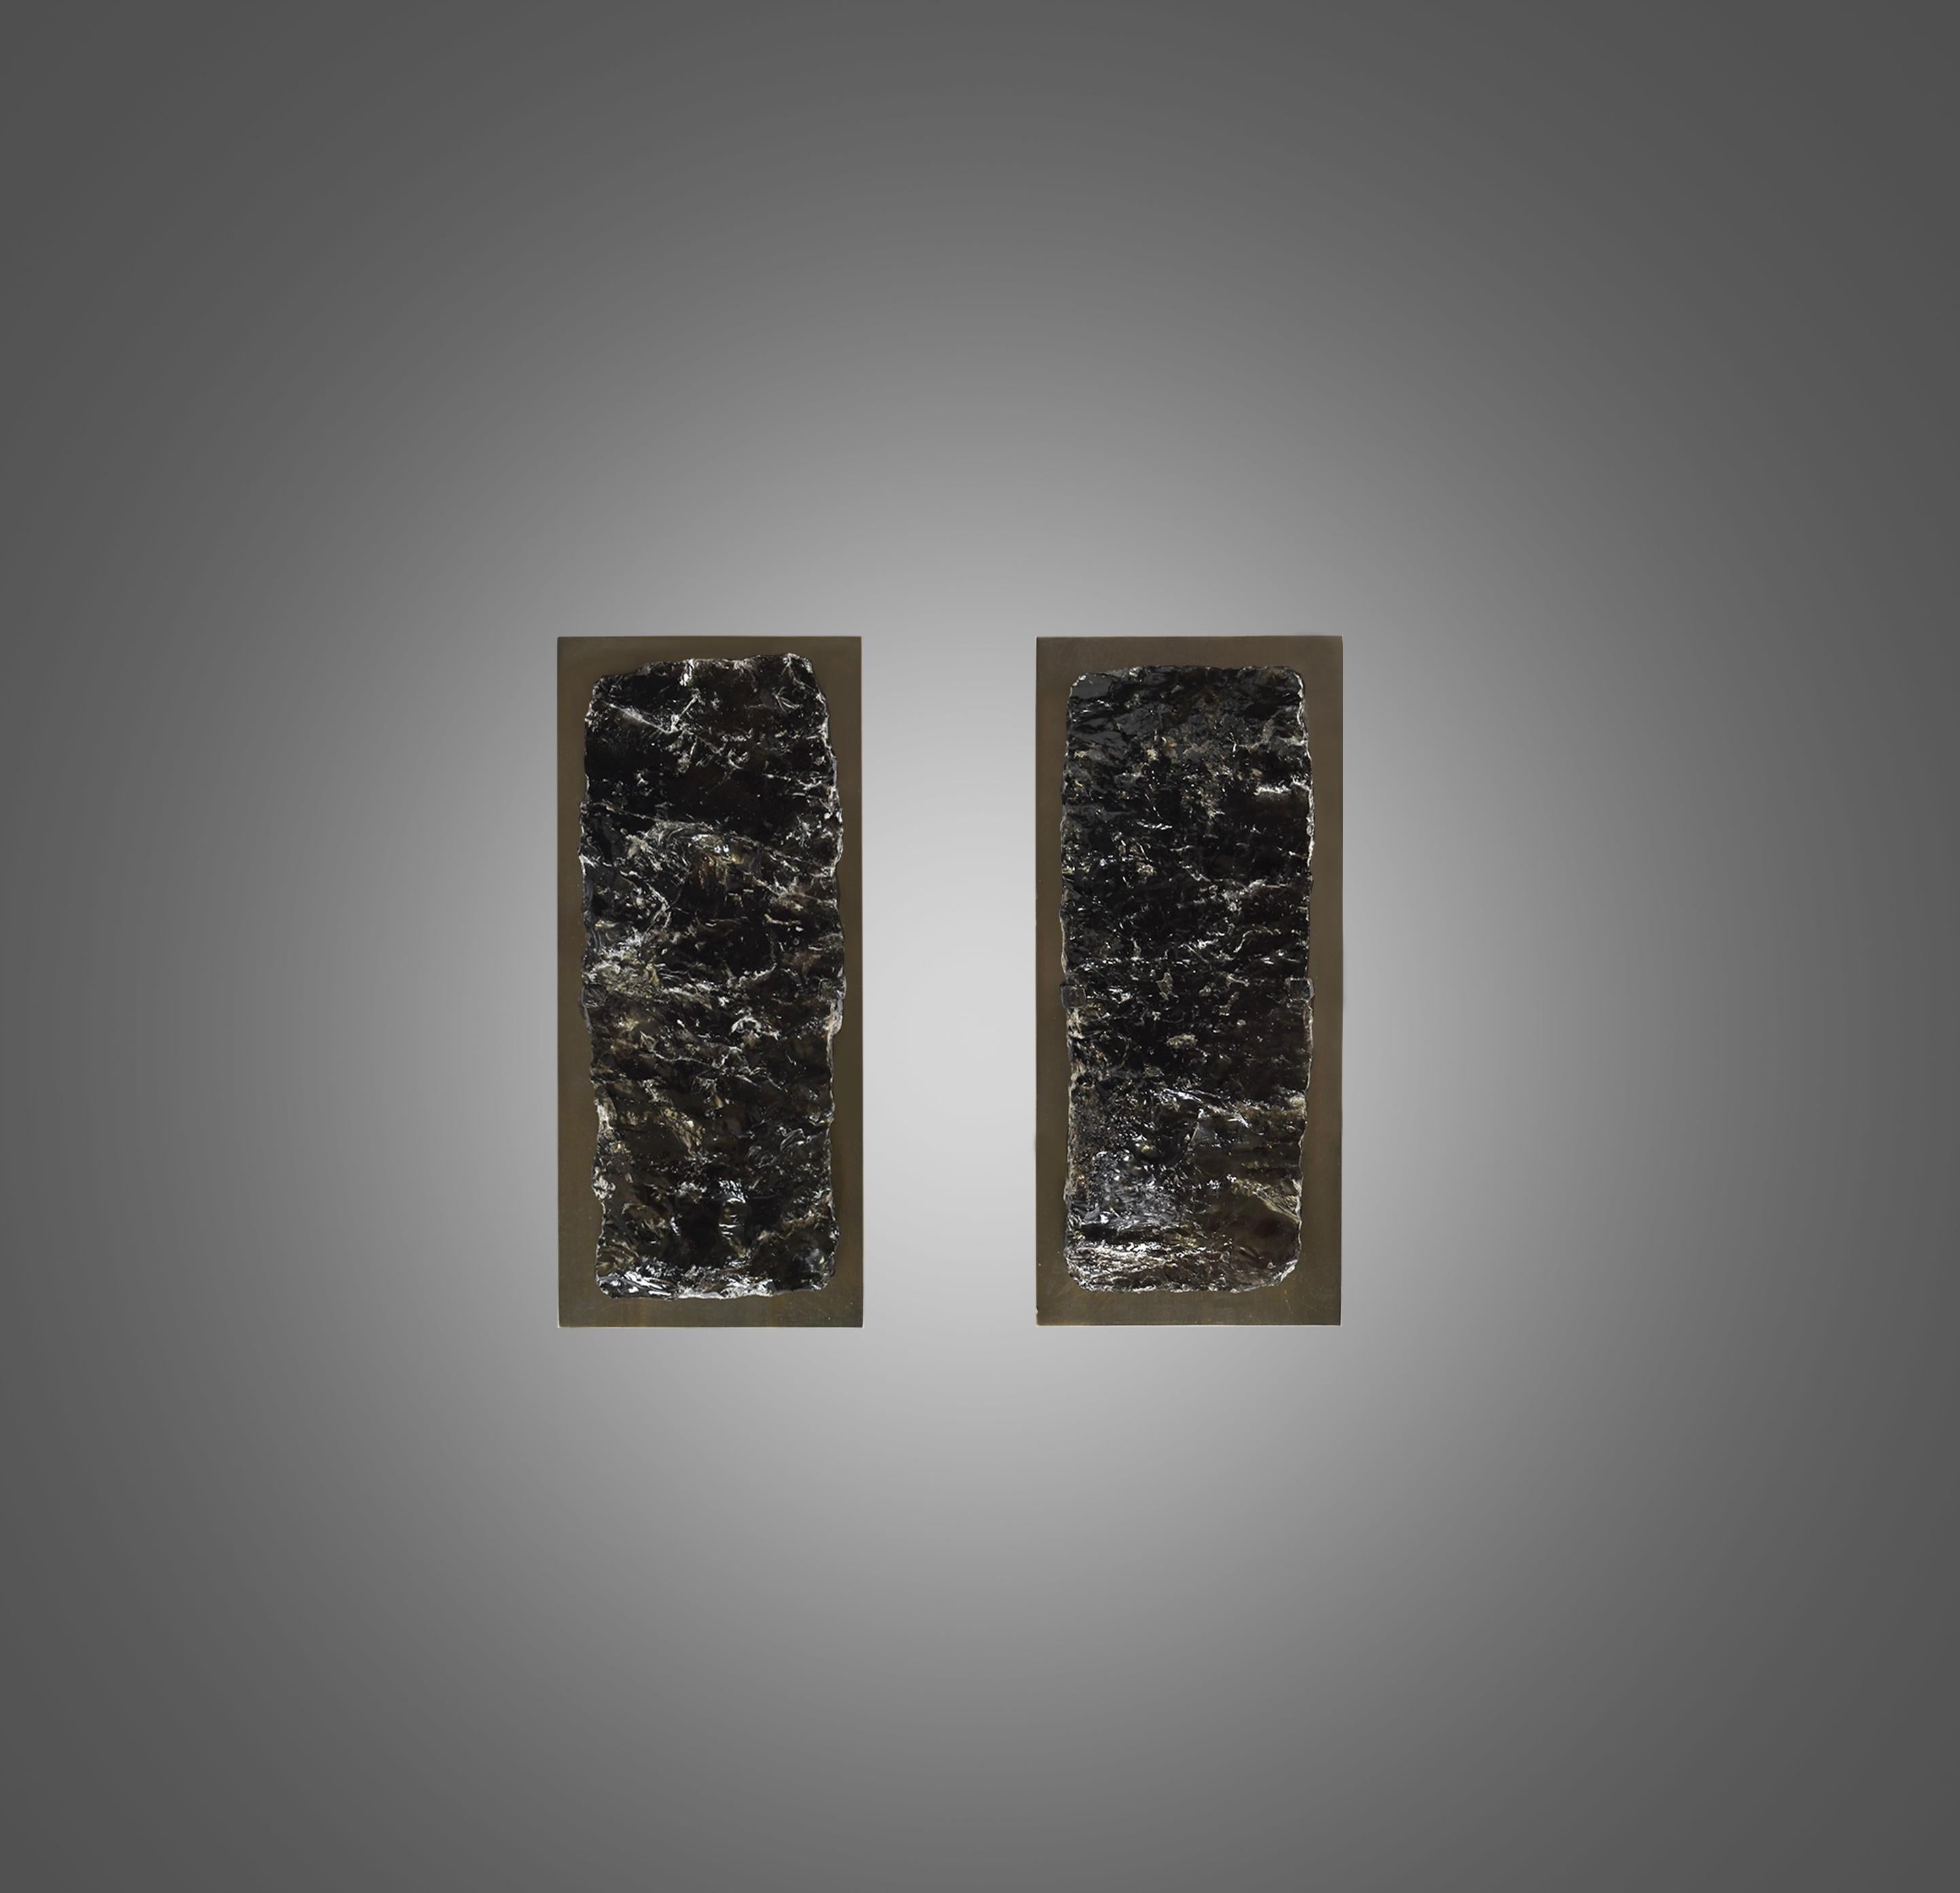 Pair of natural smoky rock crystal sconces with antique brass frames. Created by Phoenix Gallery, NYC. 
Each sconce installs 2 sockets. Use 2 led warm lights. 60 watts each light bulb, total 120 watts maximum. Lightbulb included.